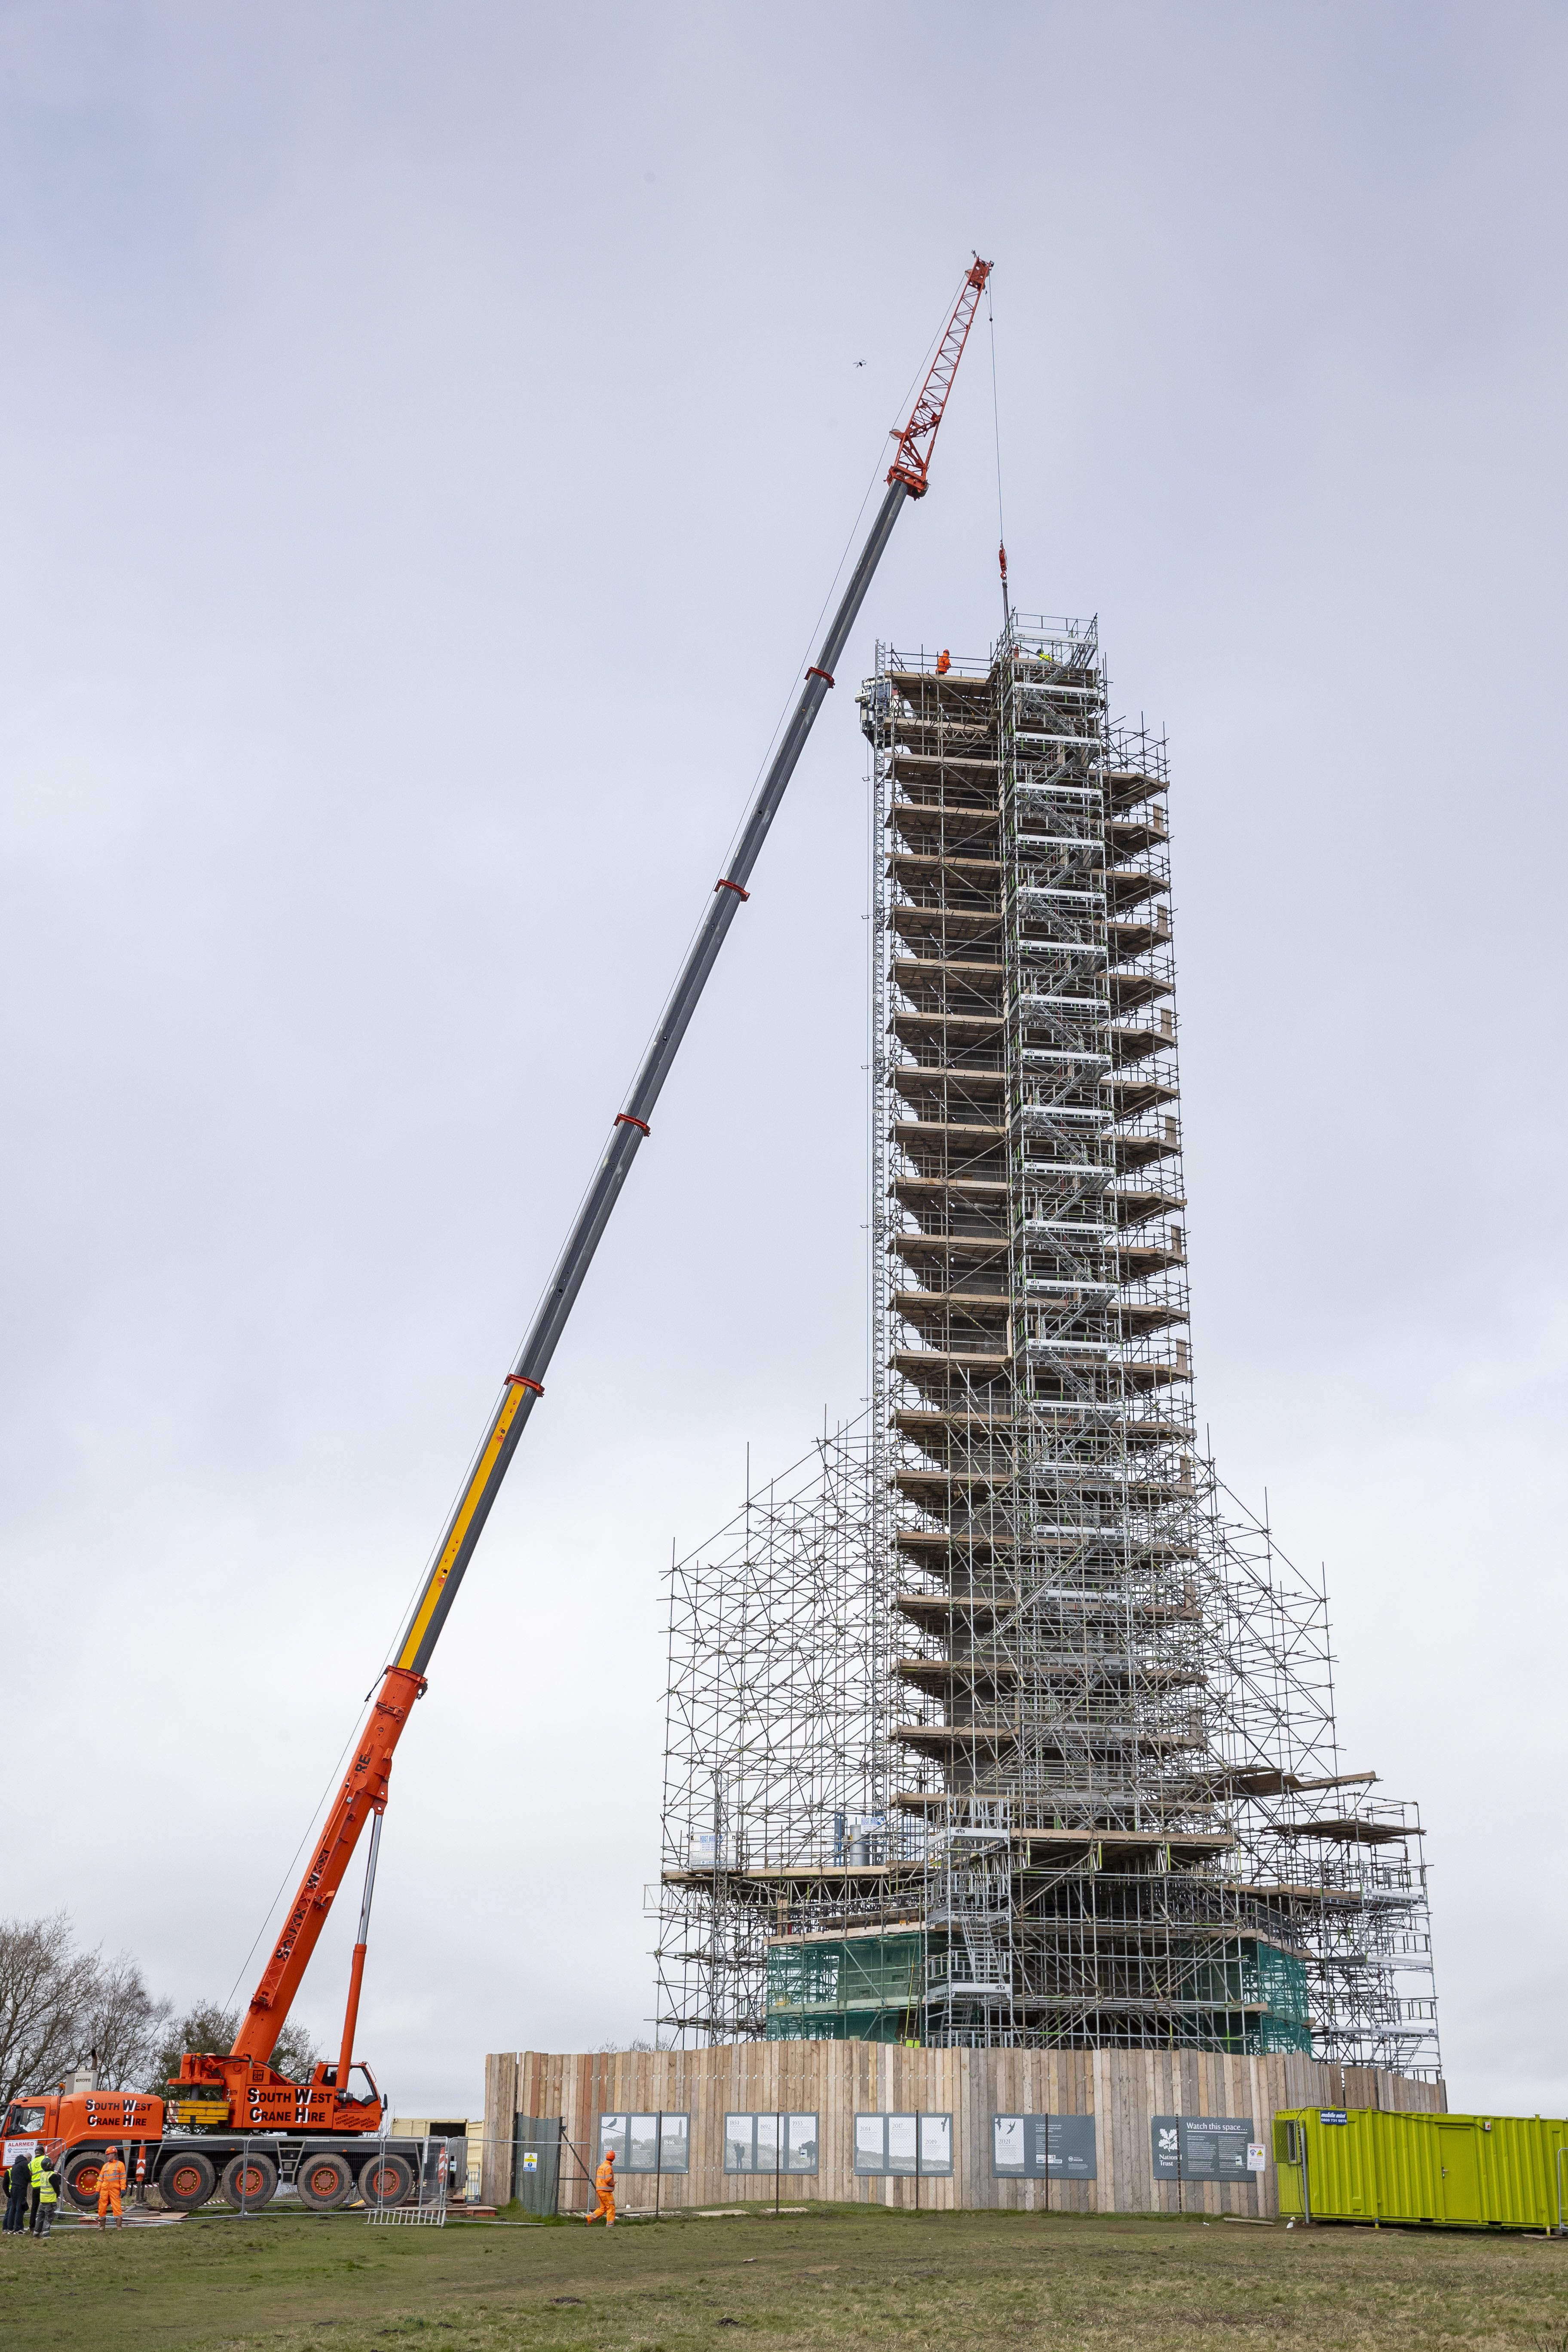 Over 1,500 new stones and eight miles of scaffolding were needed for the £3.1m project (Chris Lacey/National Trust/PA).